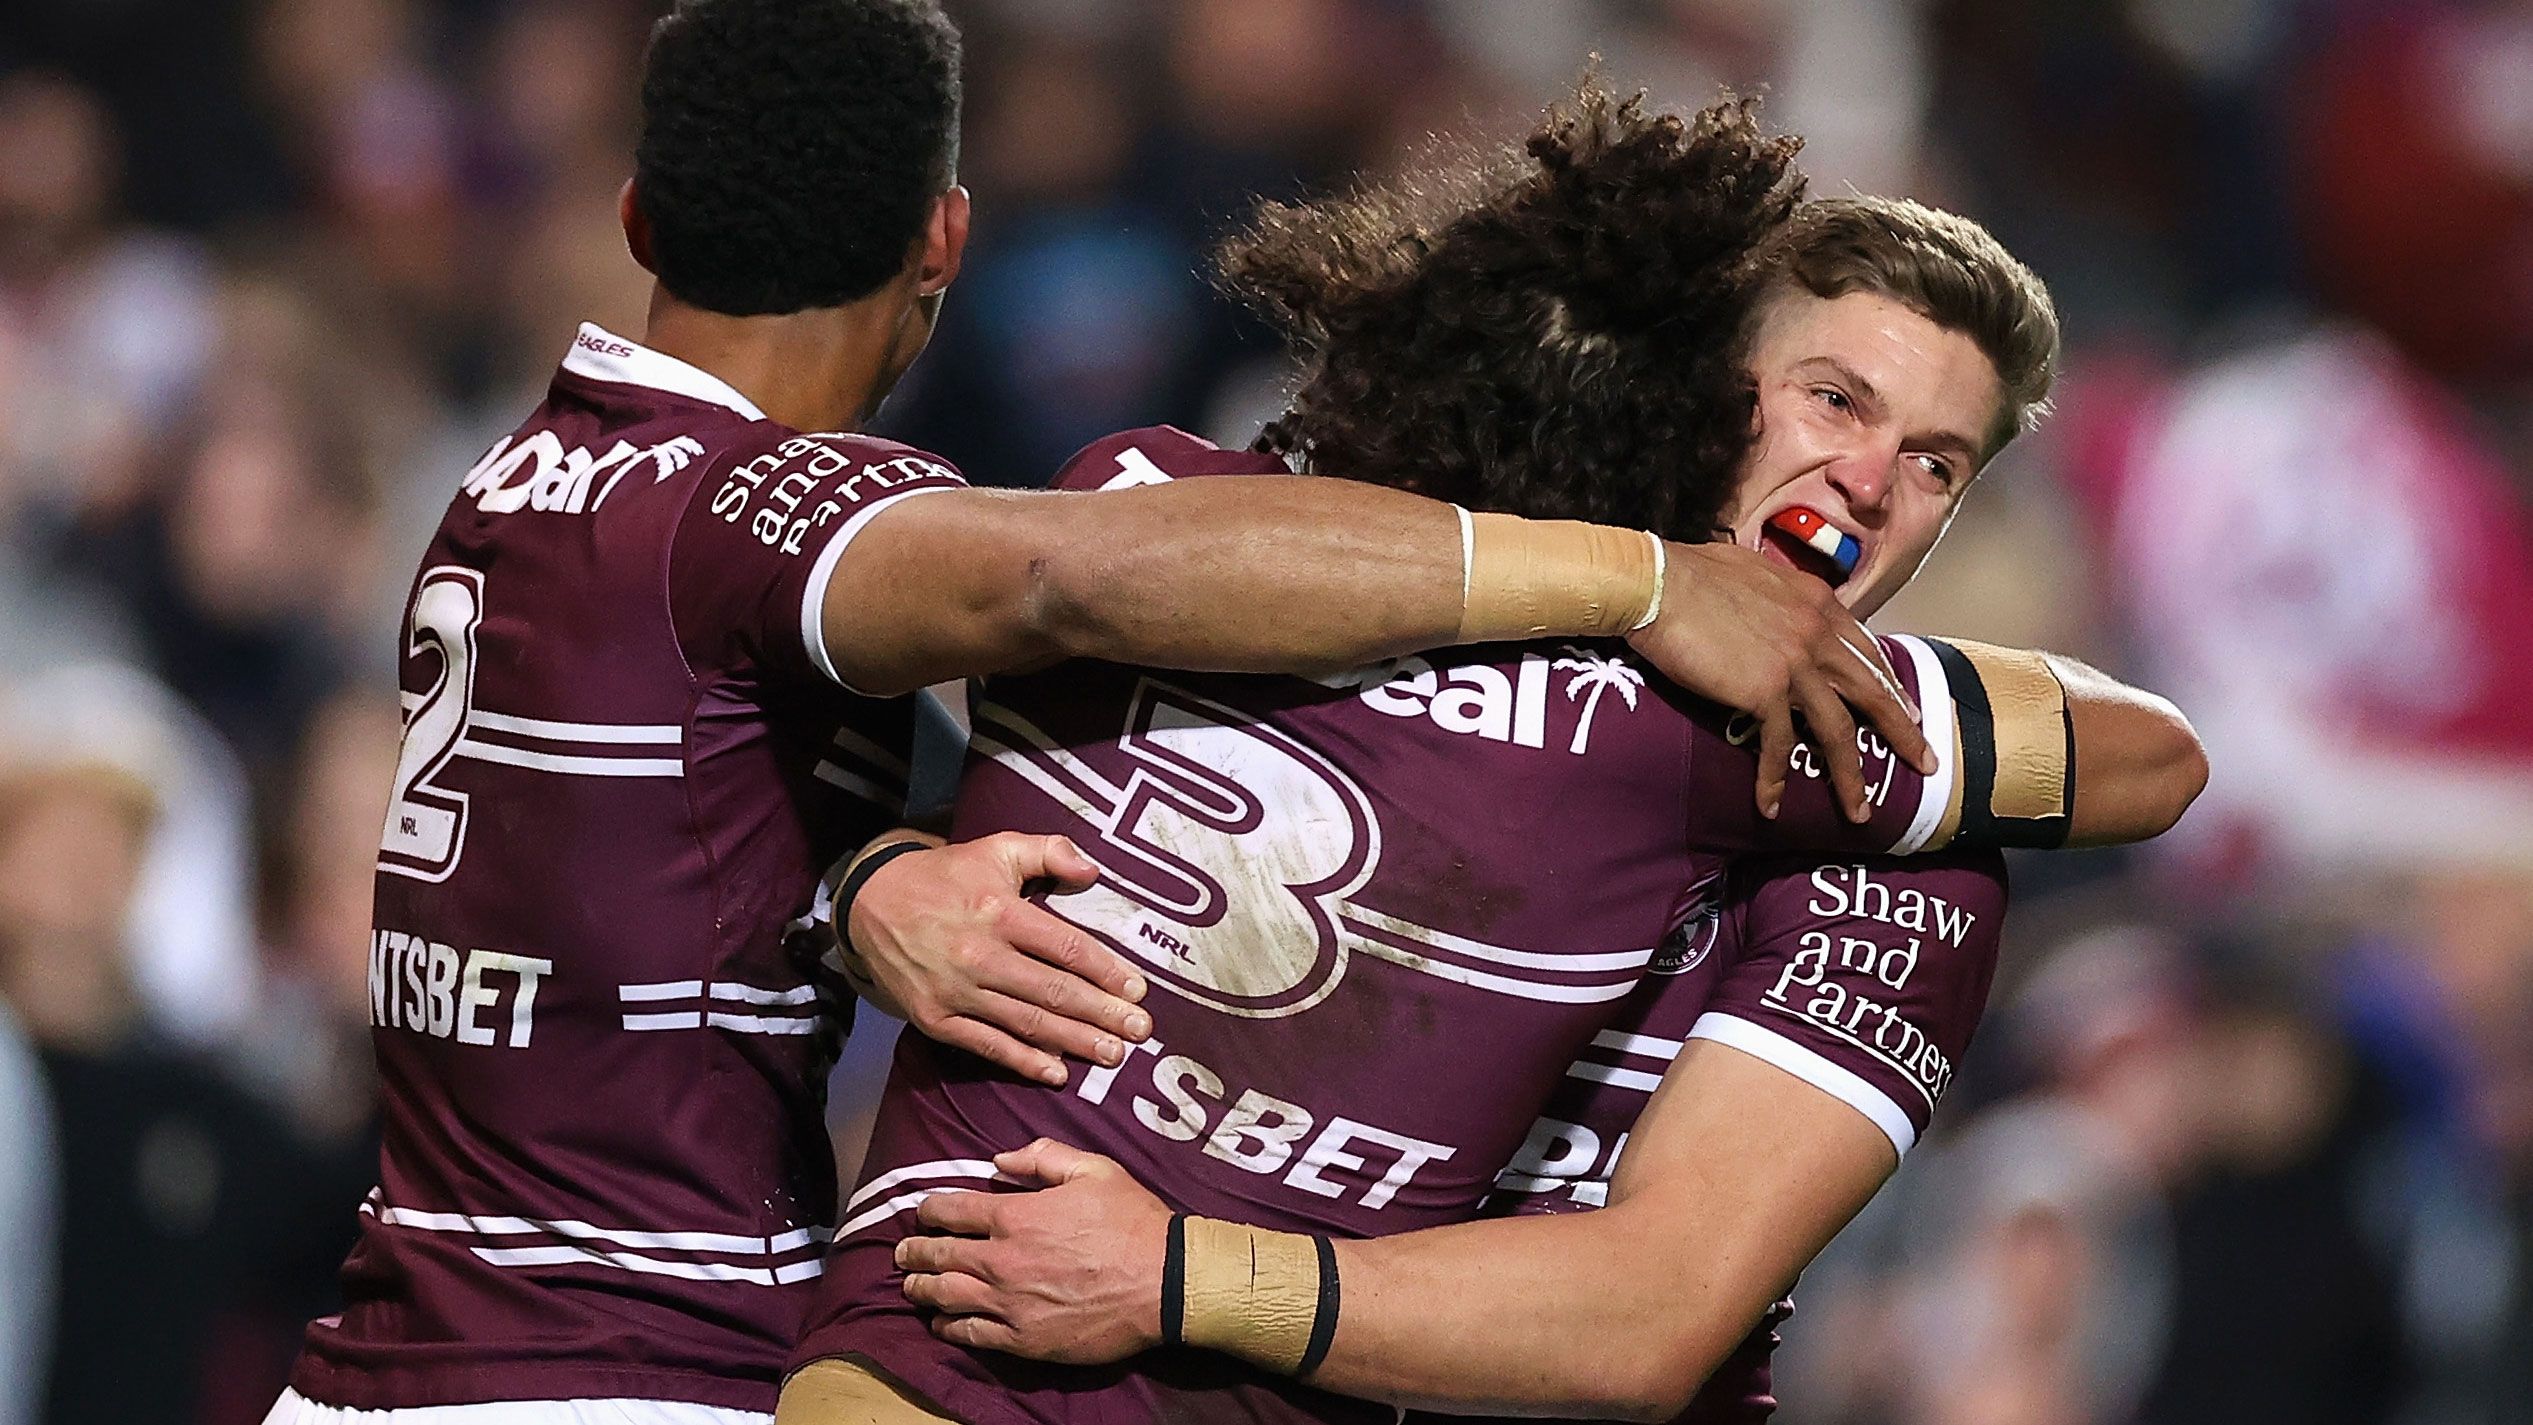 Reuben Garrick of the Sea Eagles celebrates scoring a try during the round 13 against the Warriors at 4 Pines Park.